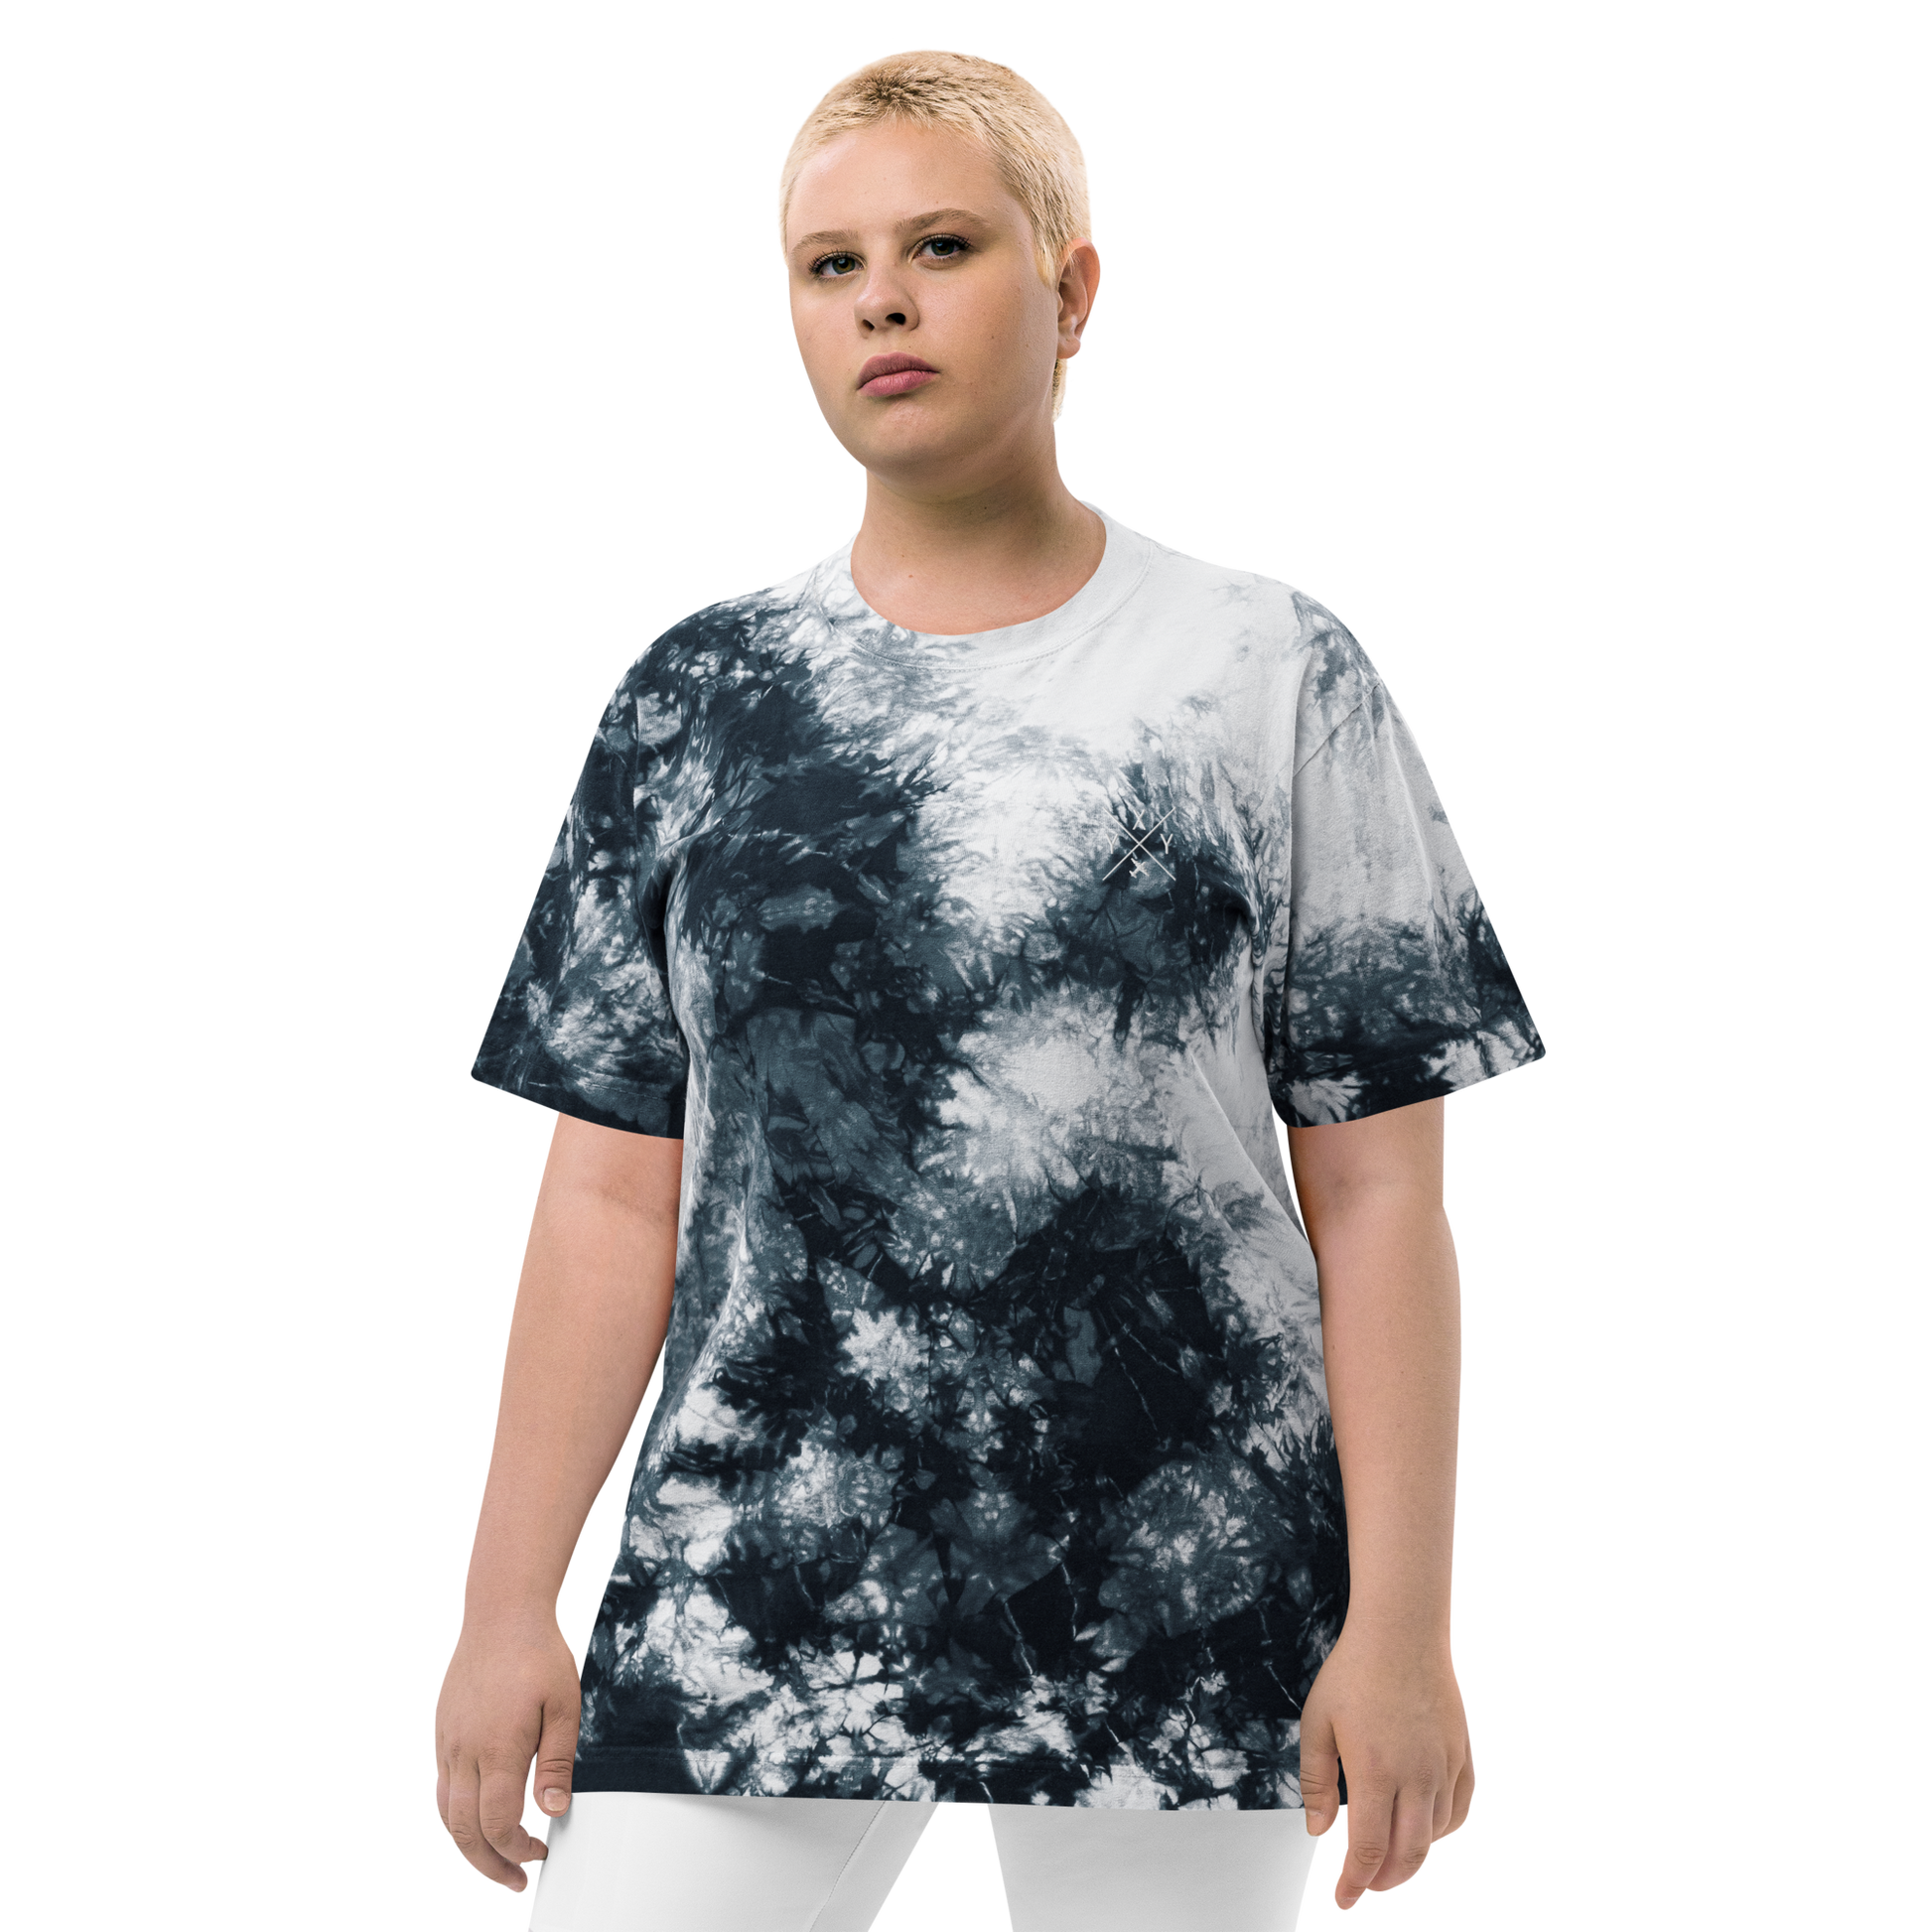 YHM Designs - YXY Whitehorse Oversized Tie-Dye T-Shirt - Crossed-X Design with Airport Code and Vintage Propliner - White Embroidery - Image 16